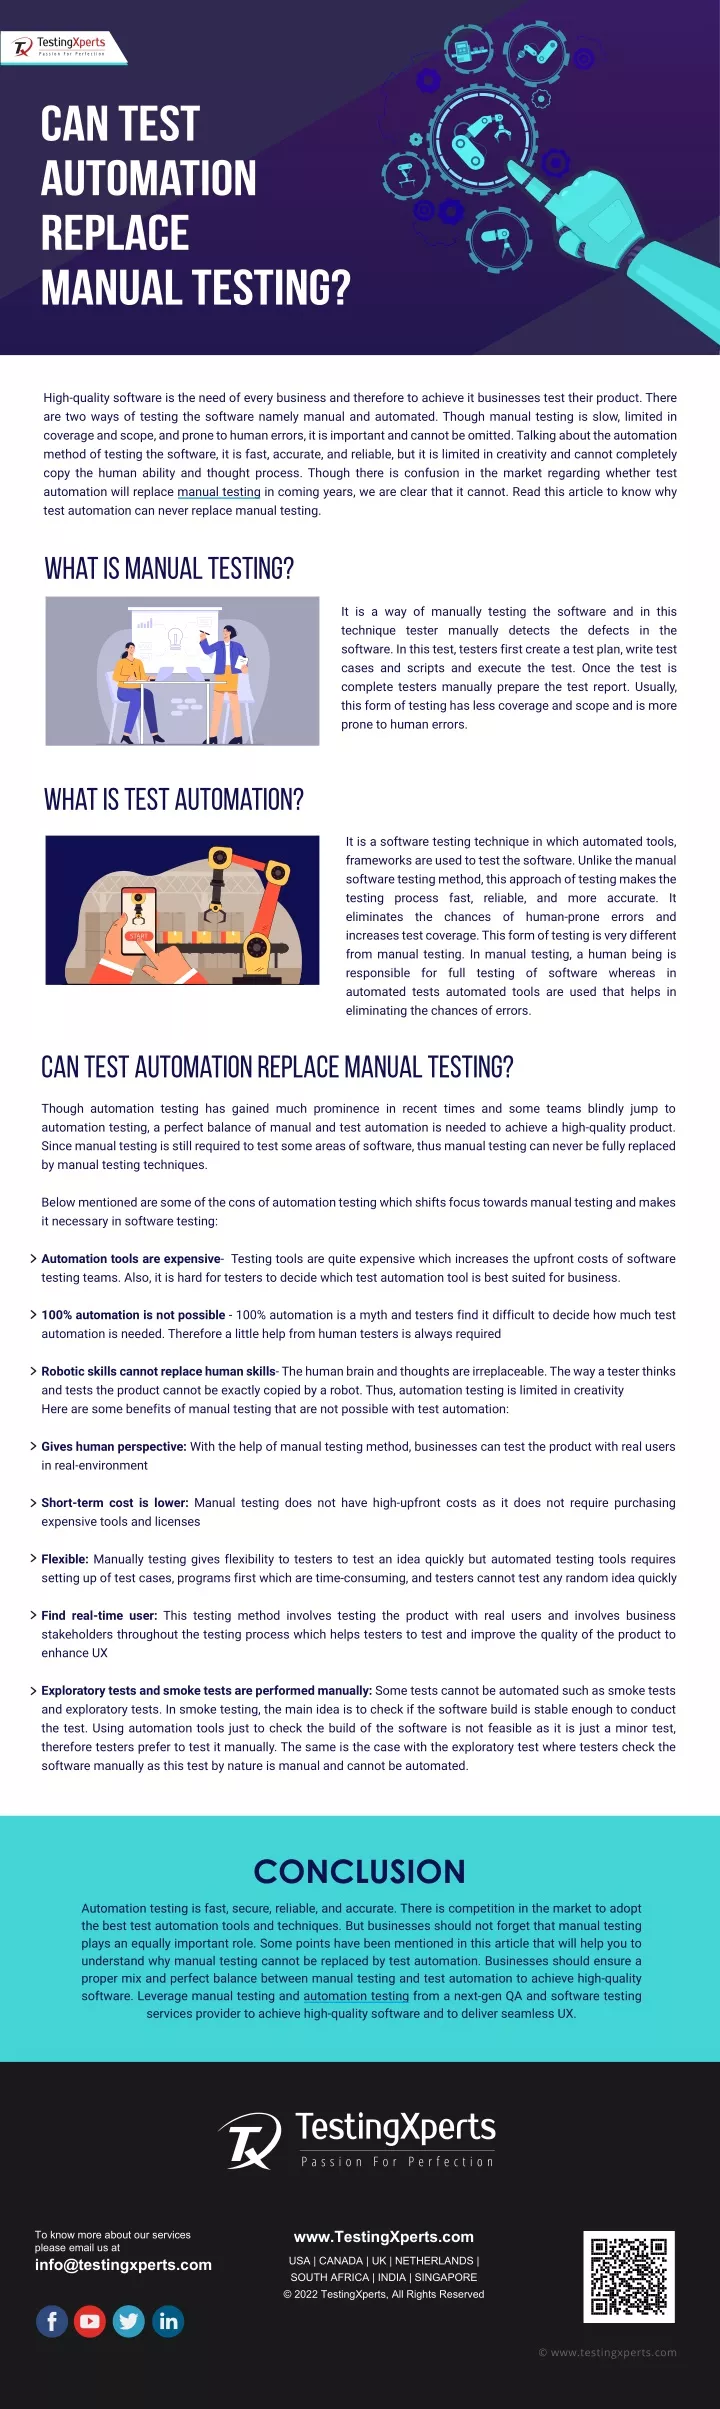 can test automation replace manual testing